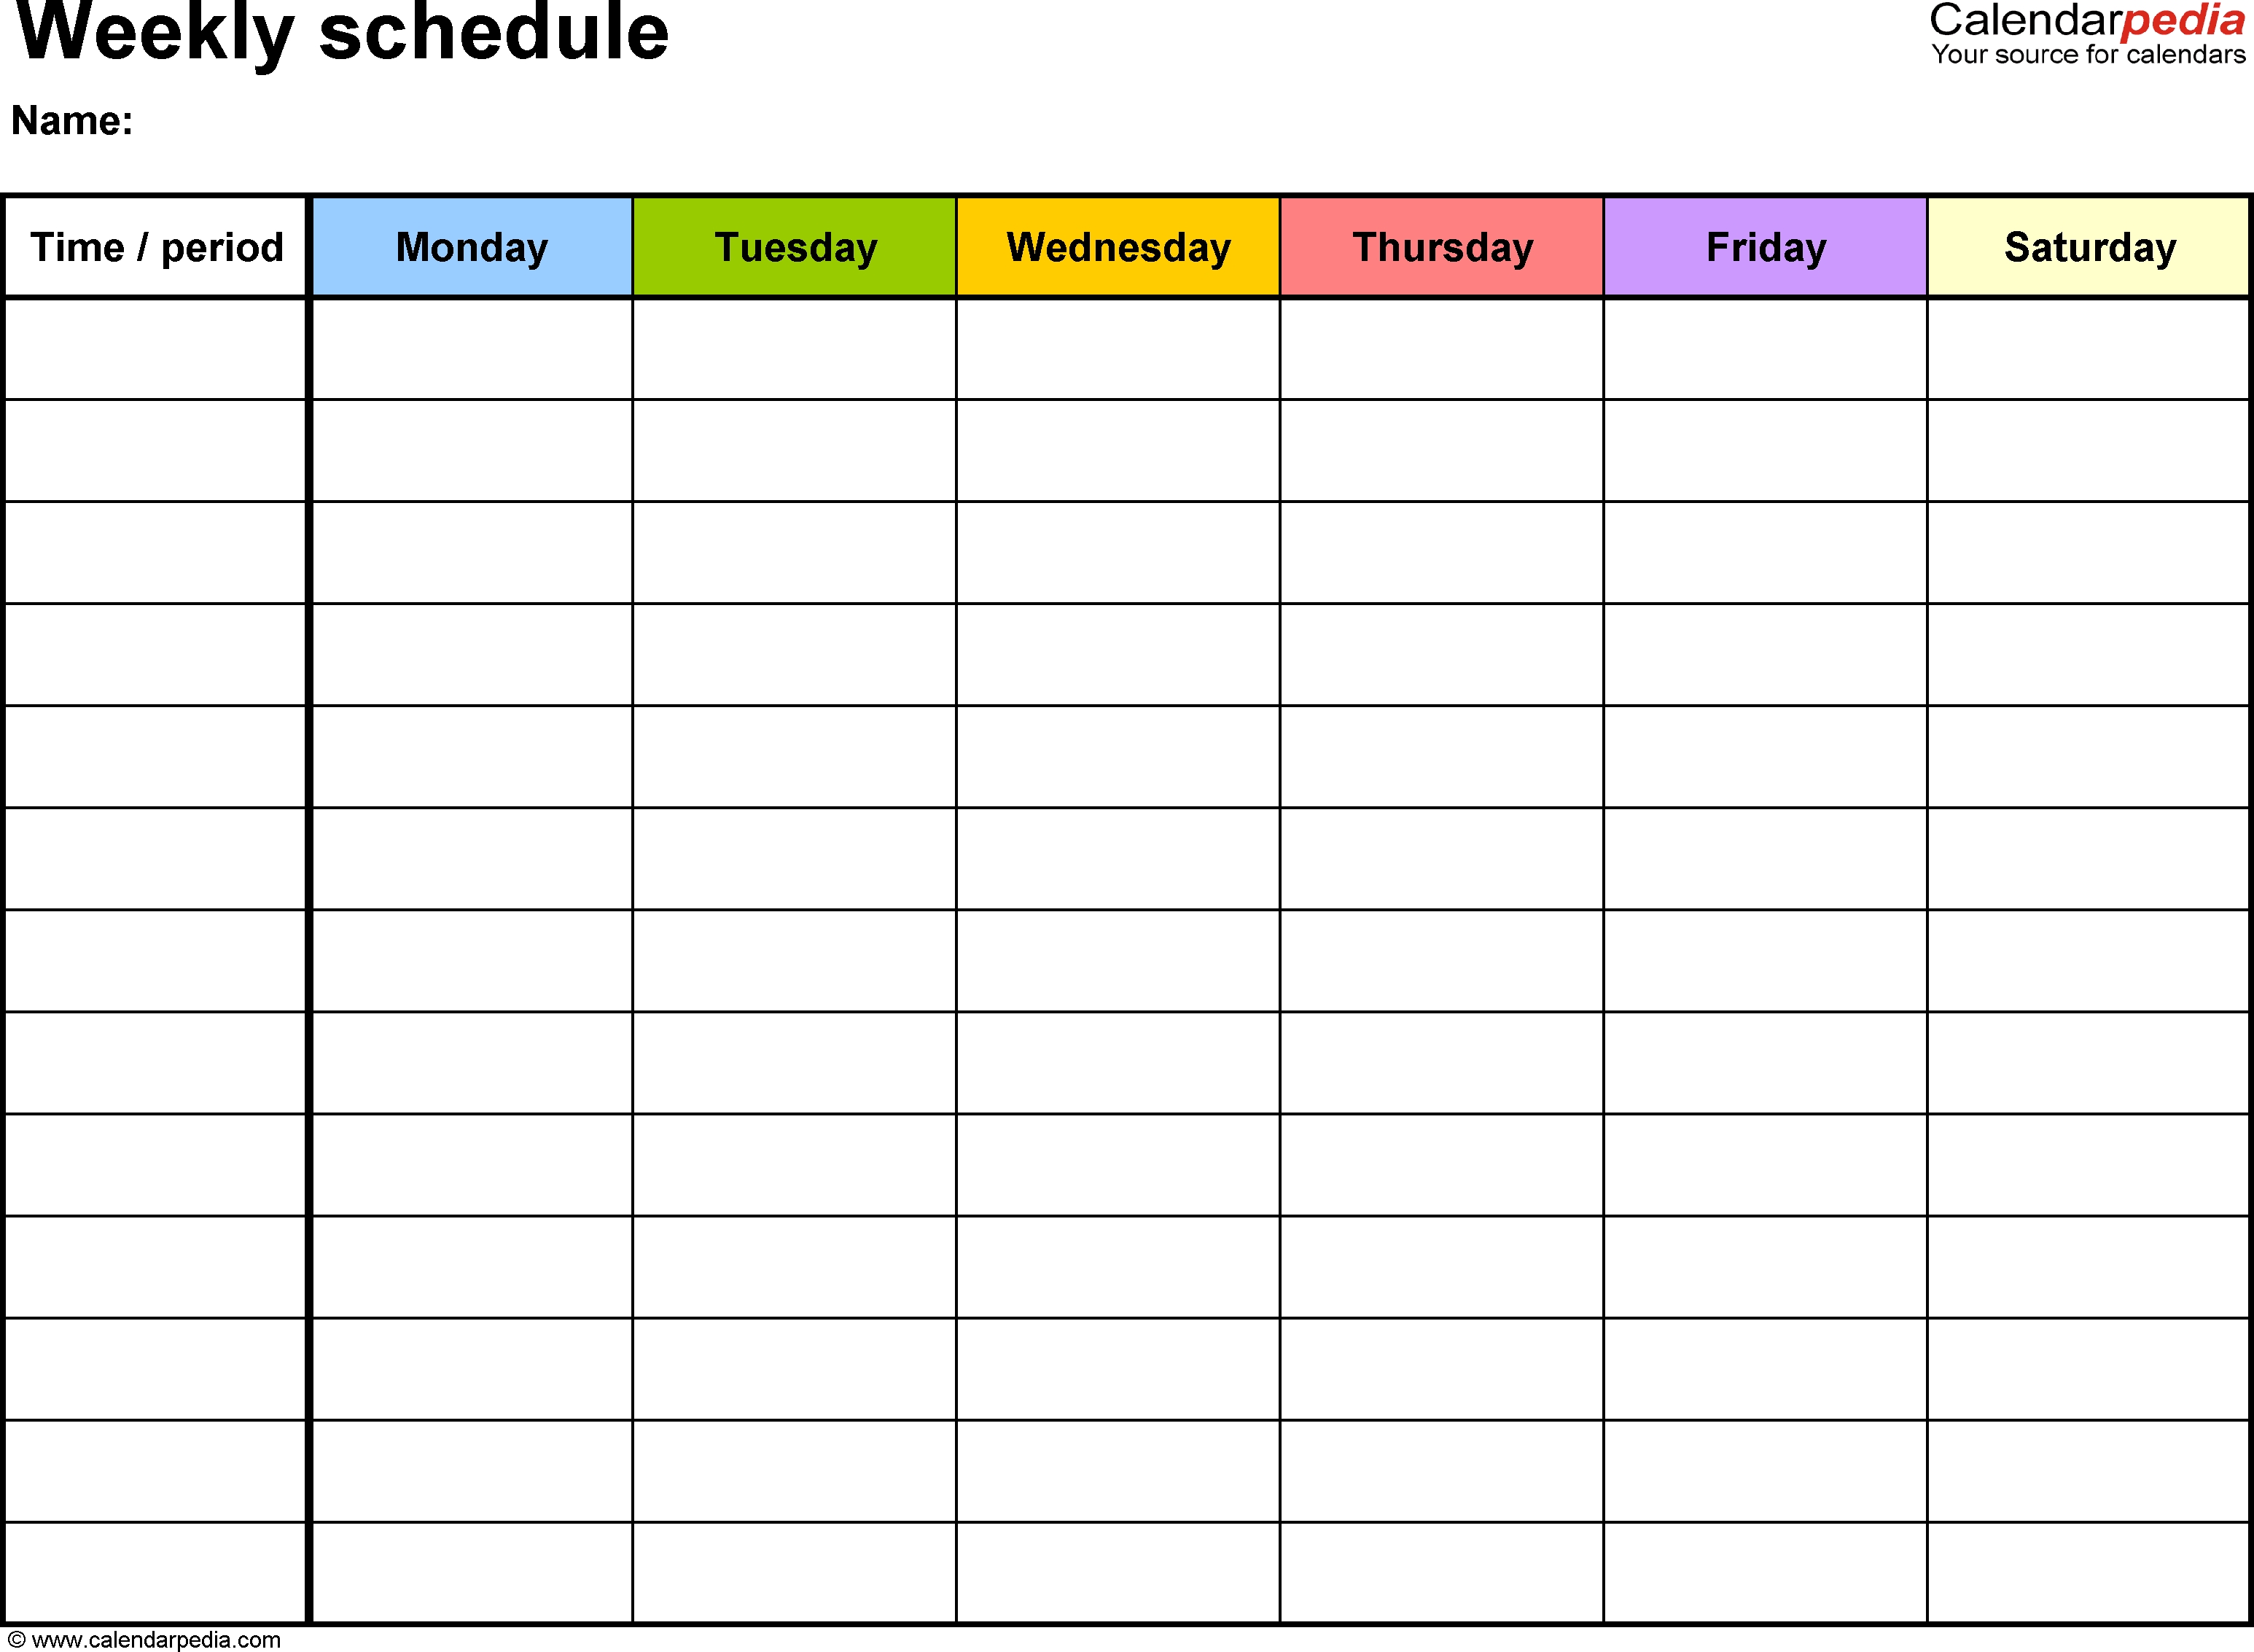 Free Weekly Schedule Templates For Word - 18 Templates for Monday Through Friday Calendar Printable